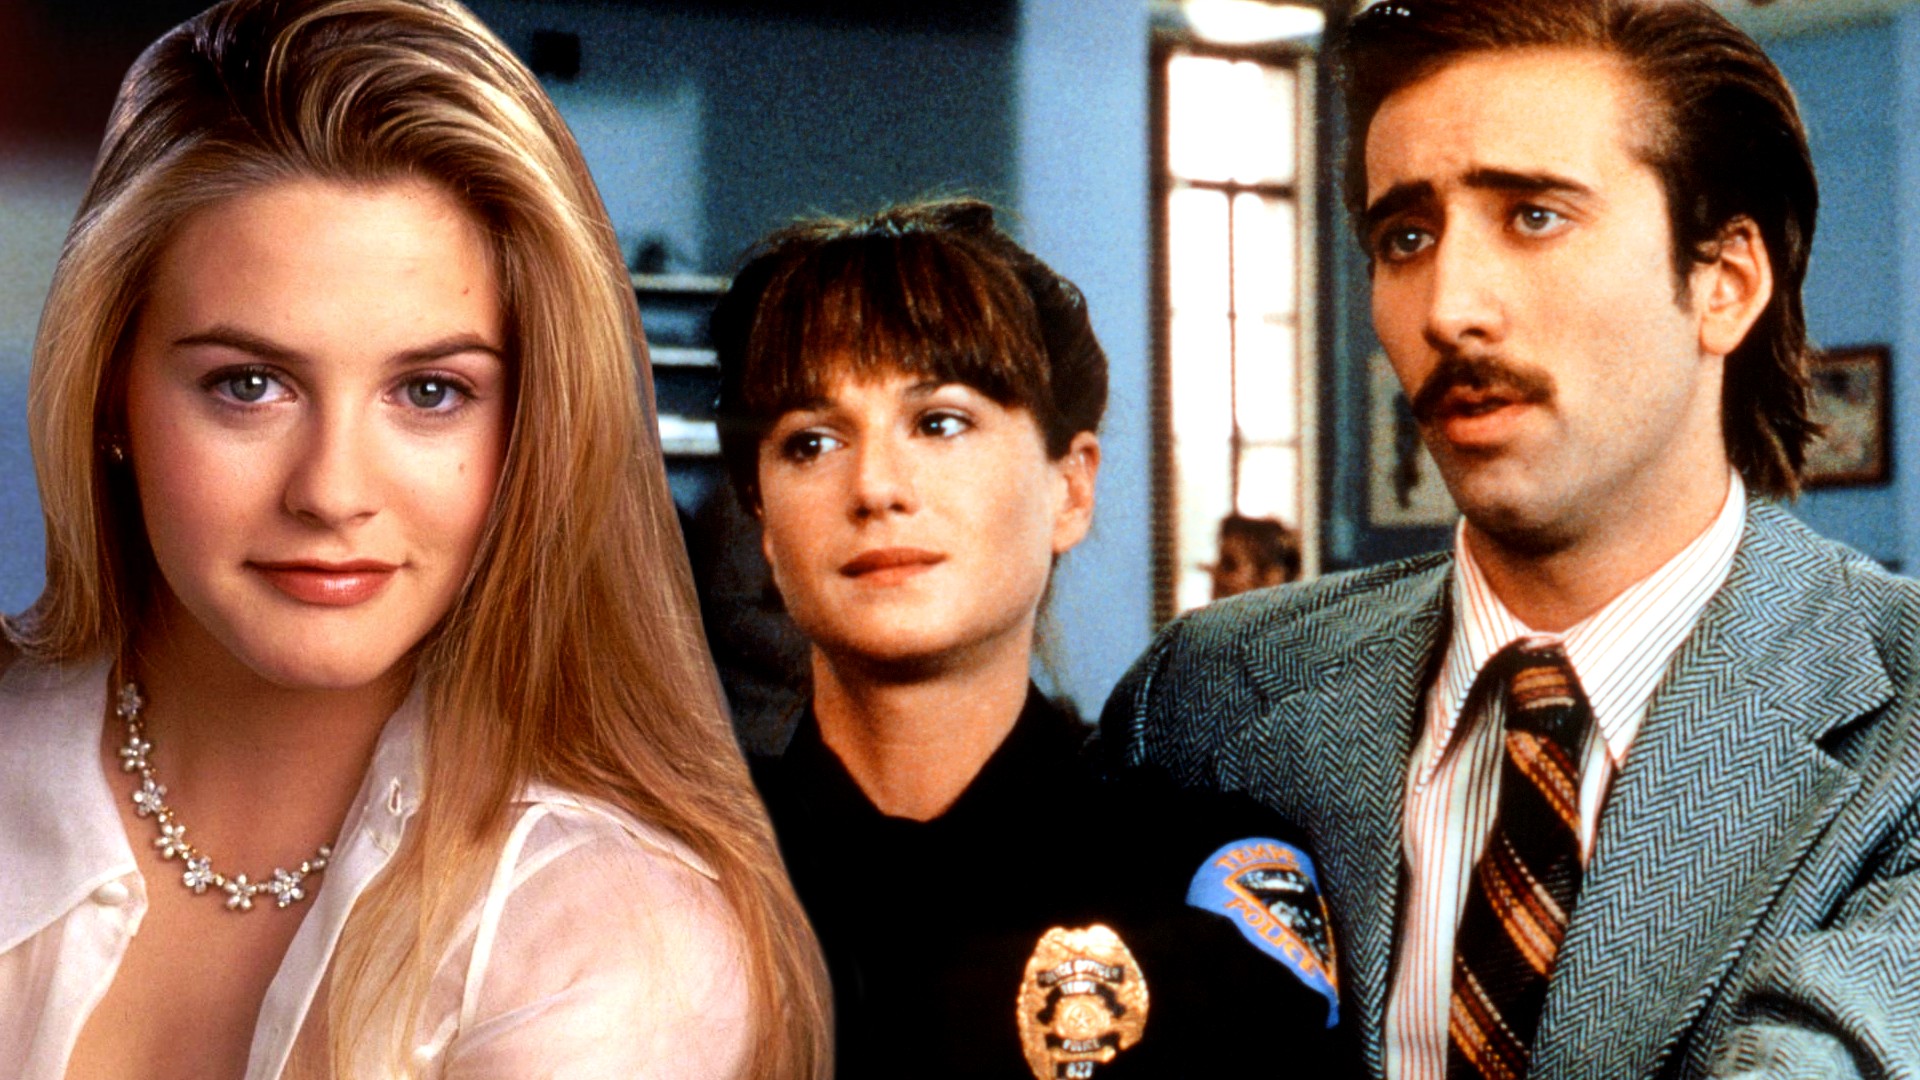 34 Best Comedy Movies of All Time, According to Rotten Tomatoes